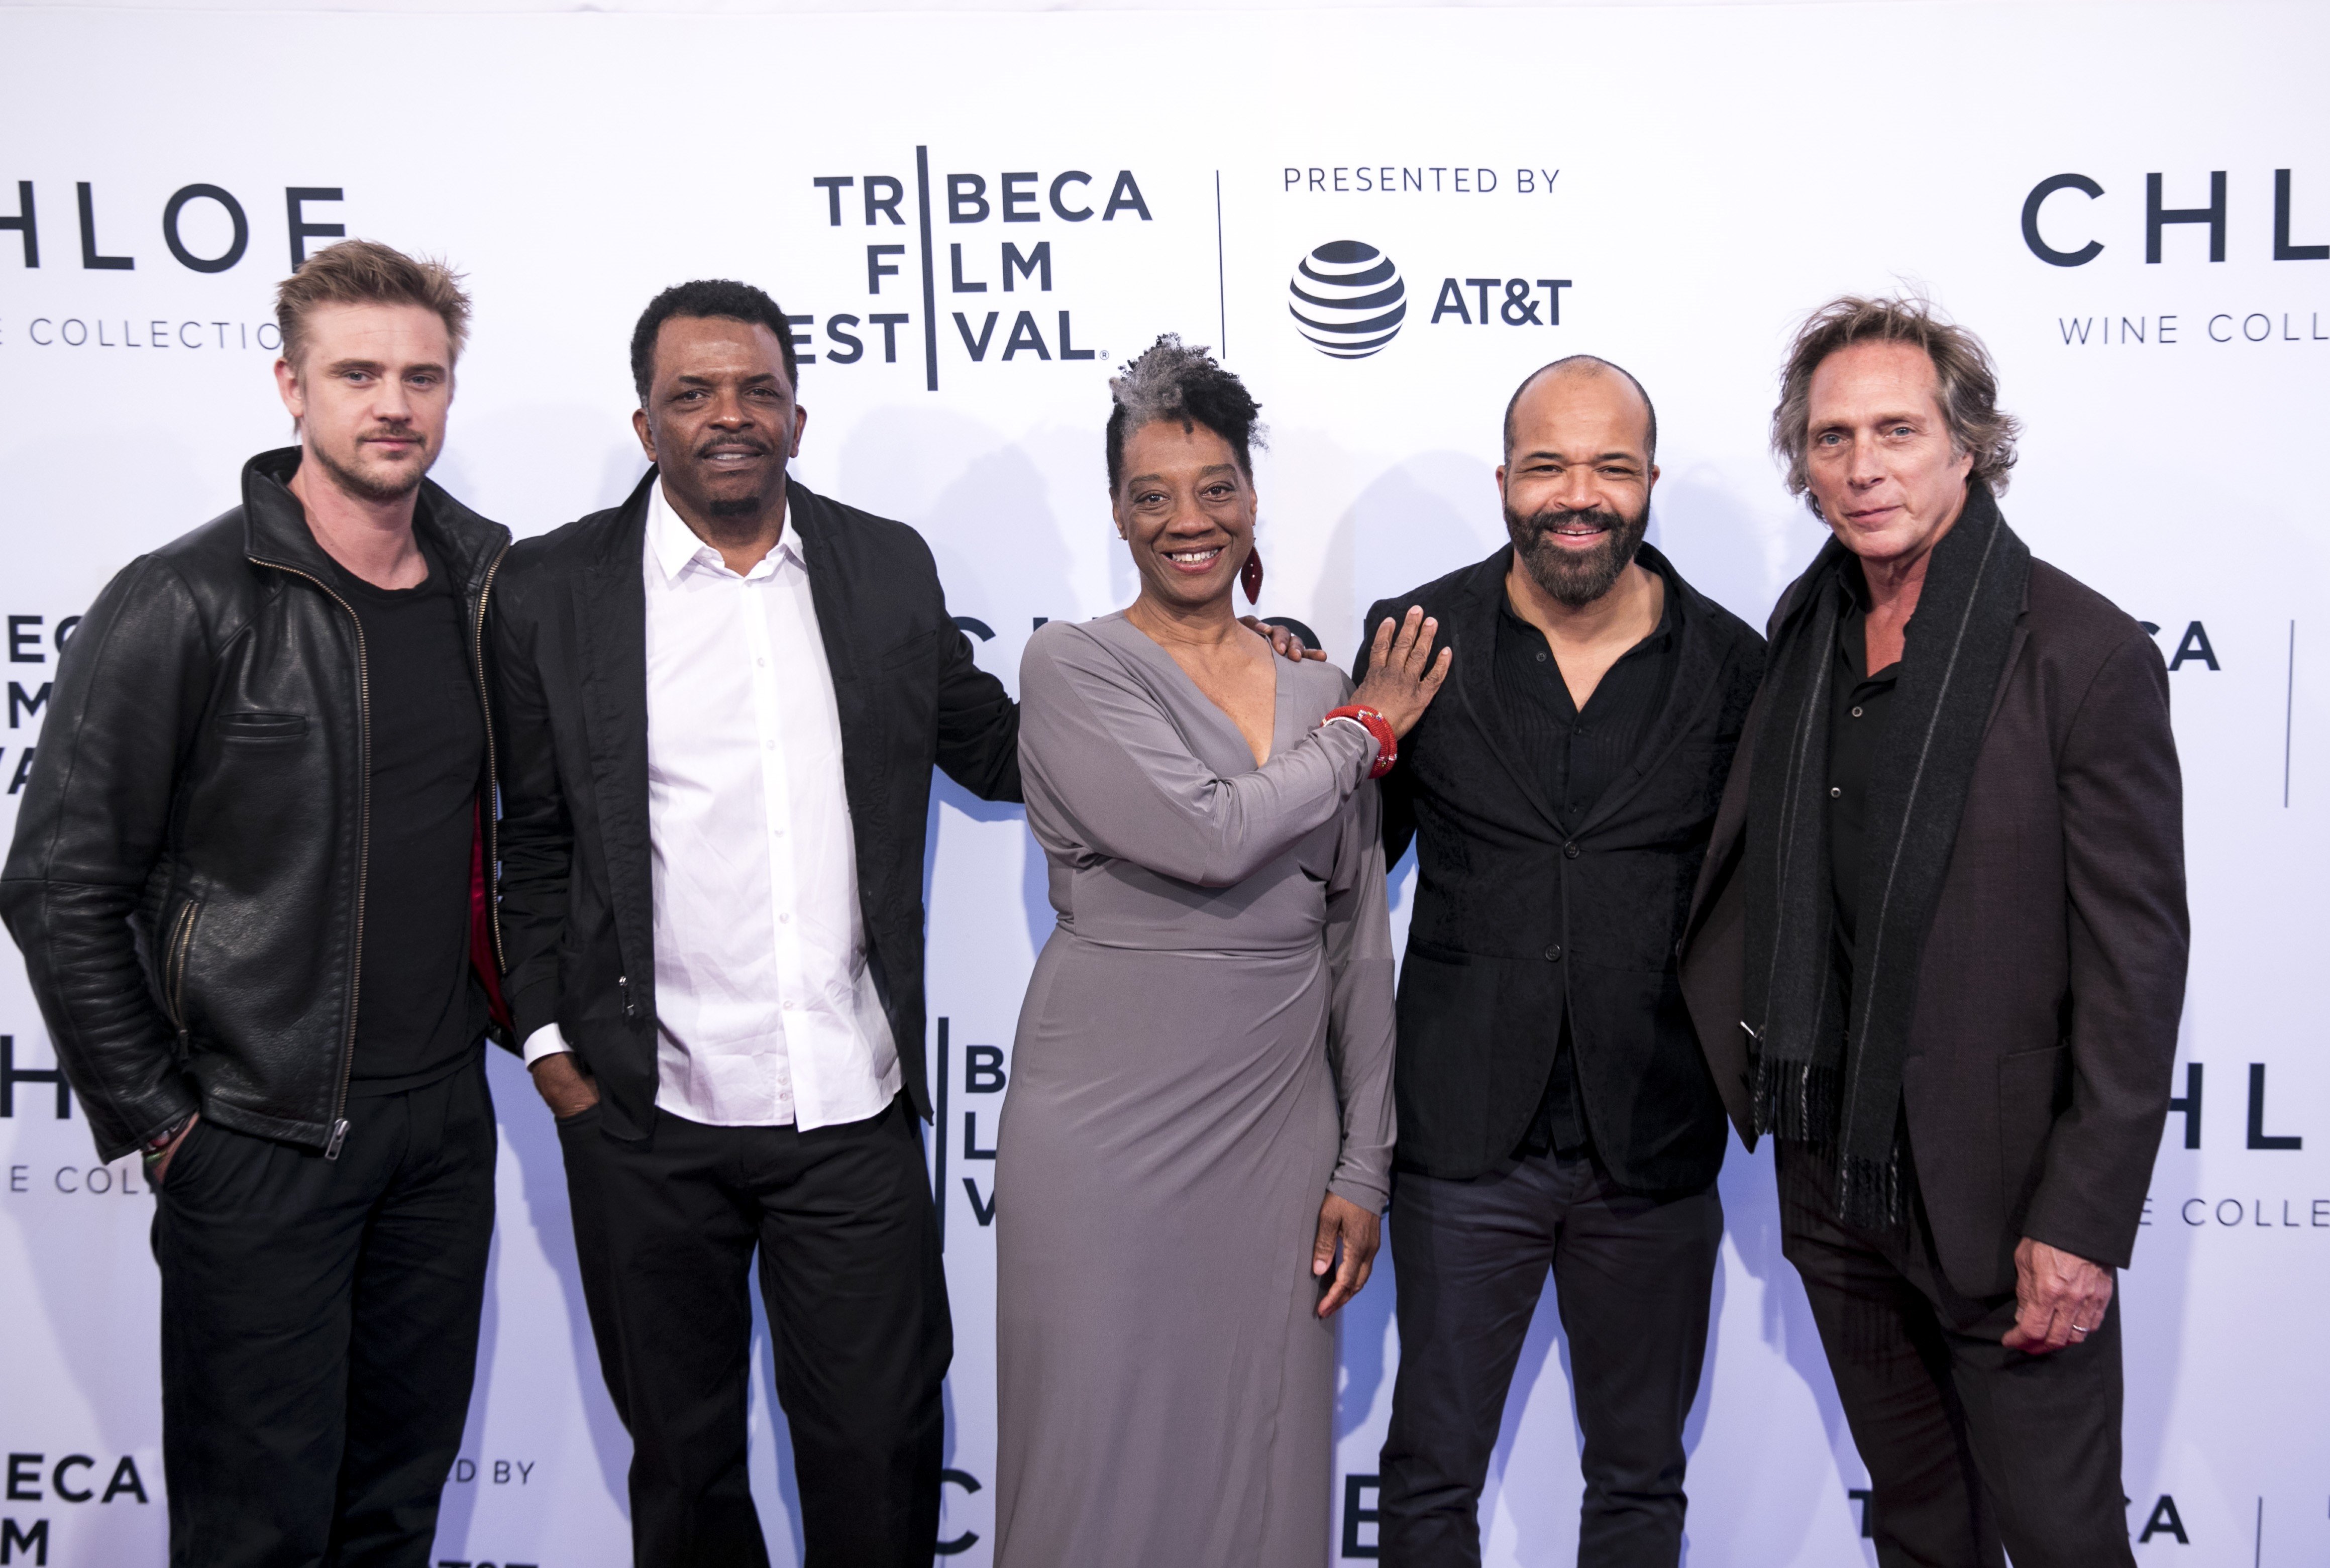 (L-R) Boyd Holbrook, Kevin Jackson, Stephanie Berry, Jeffrey Wright, William Fichtner, attend the screening of 'O.G.' in New York on April 20, 2018. | Source: Getty Images